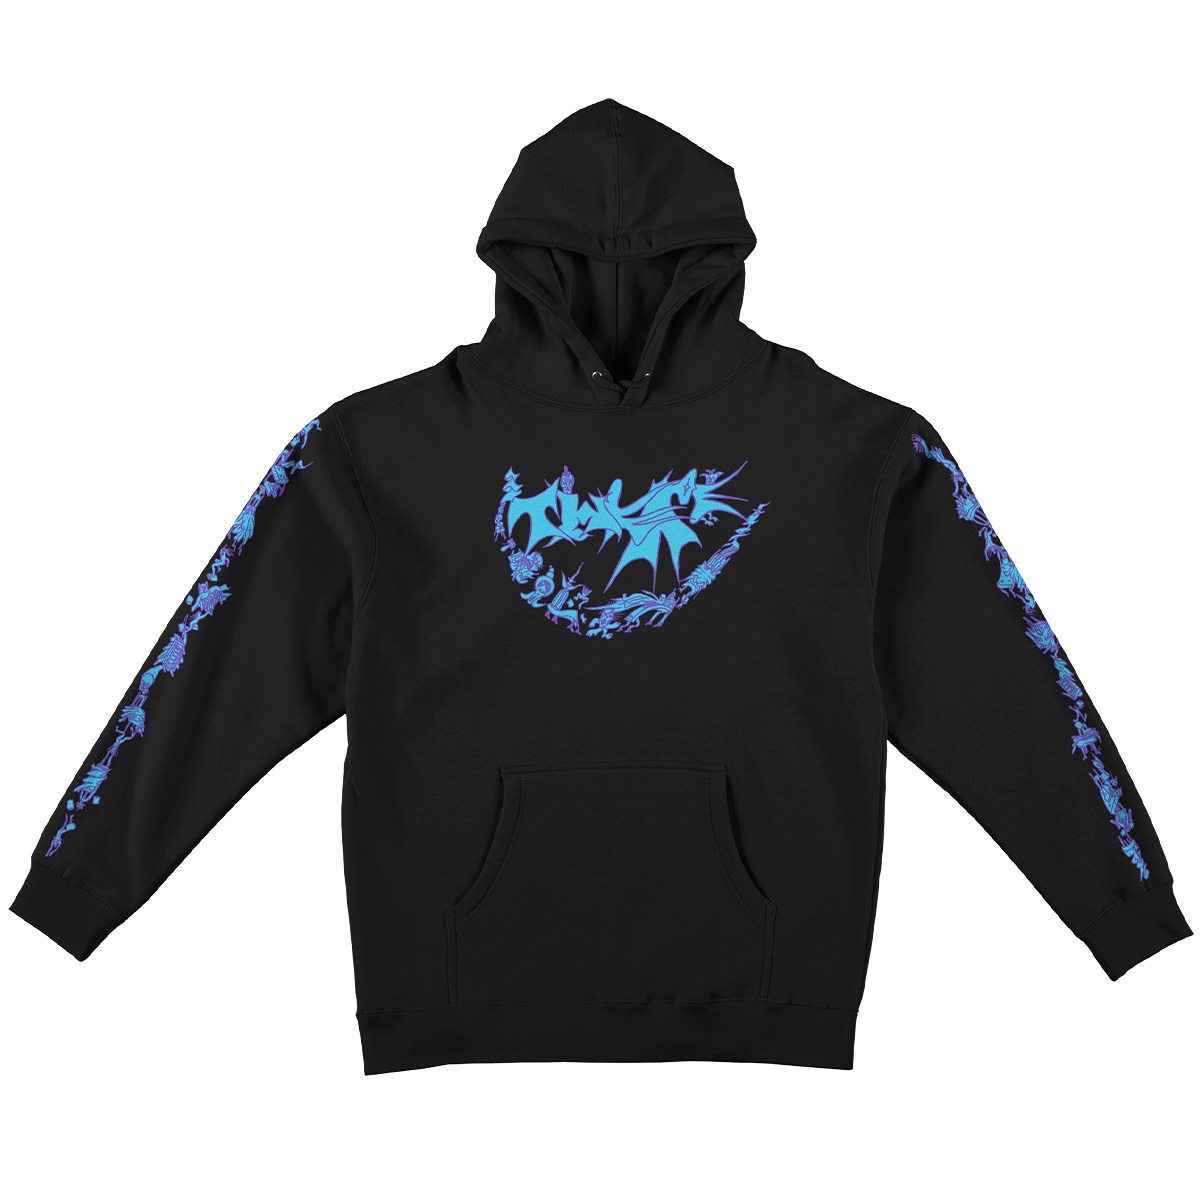 There Midnight Oil Hoodie Black